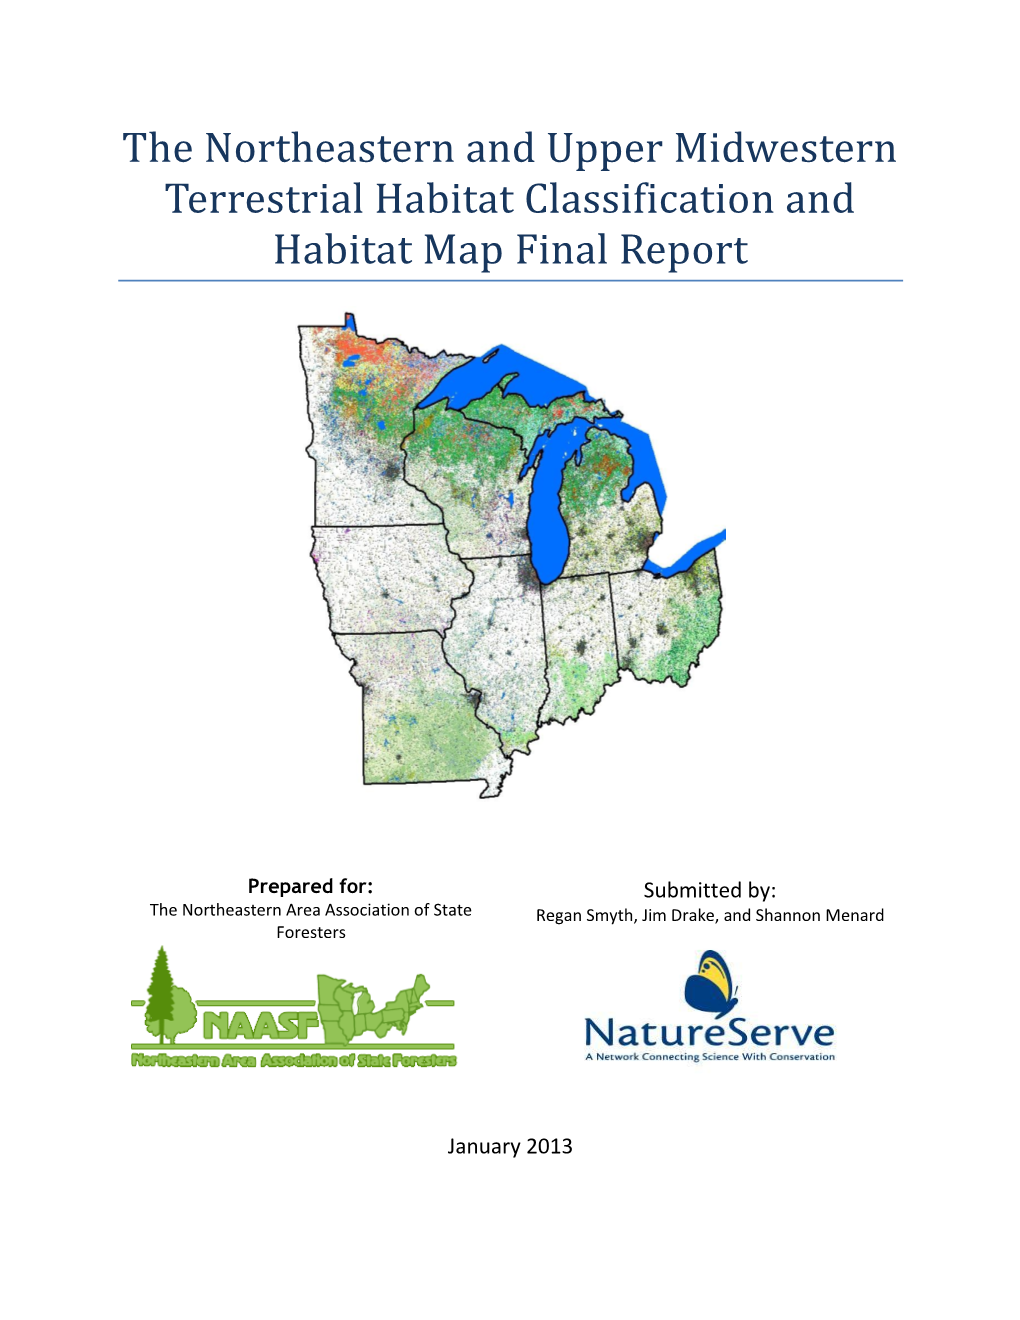 The Northeastern and Upper Midwestern Terrestrial Habitat Classification and Habitat Map Final Report